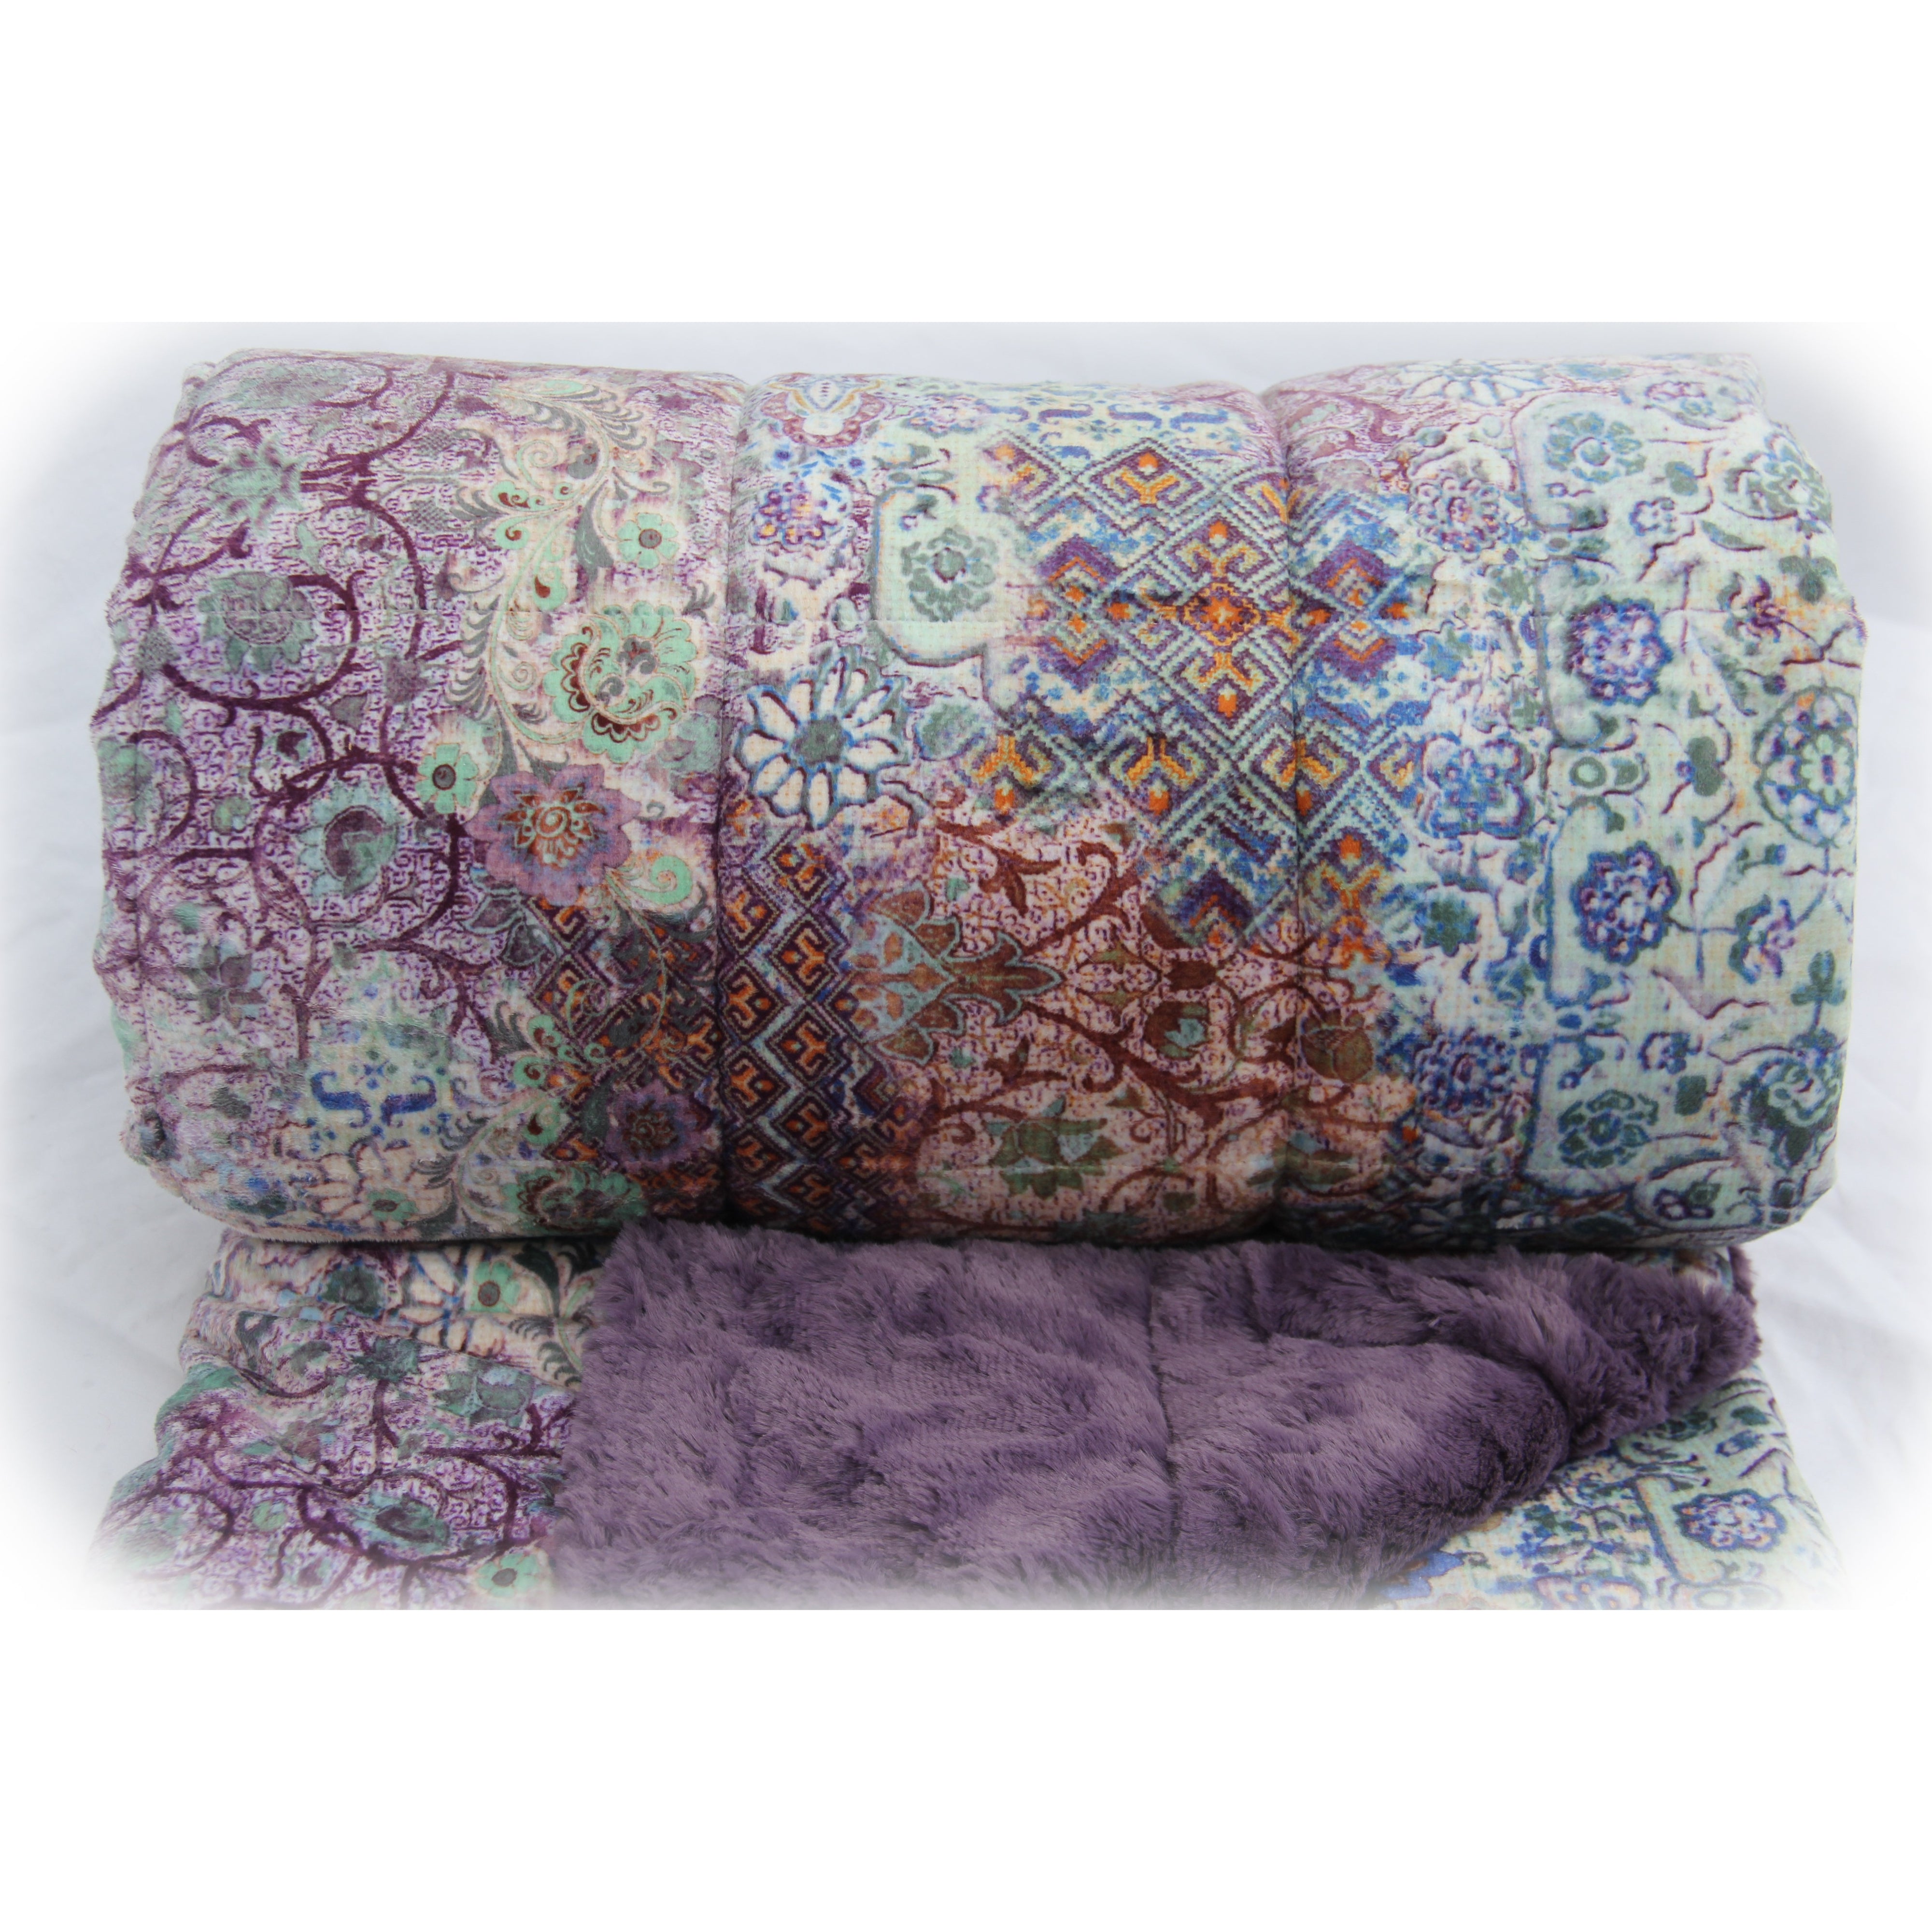 Minky Weighted Blanket 2-6 LBS X-Small Youth Mystik Plum – Soothing Weight